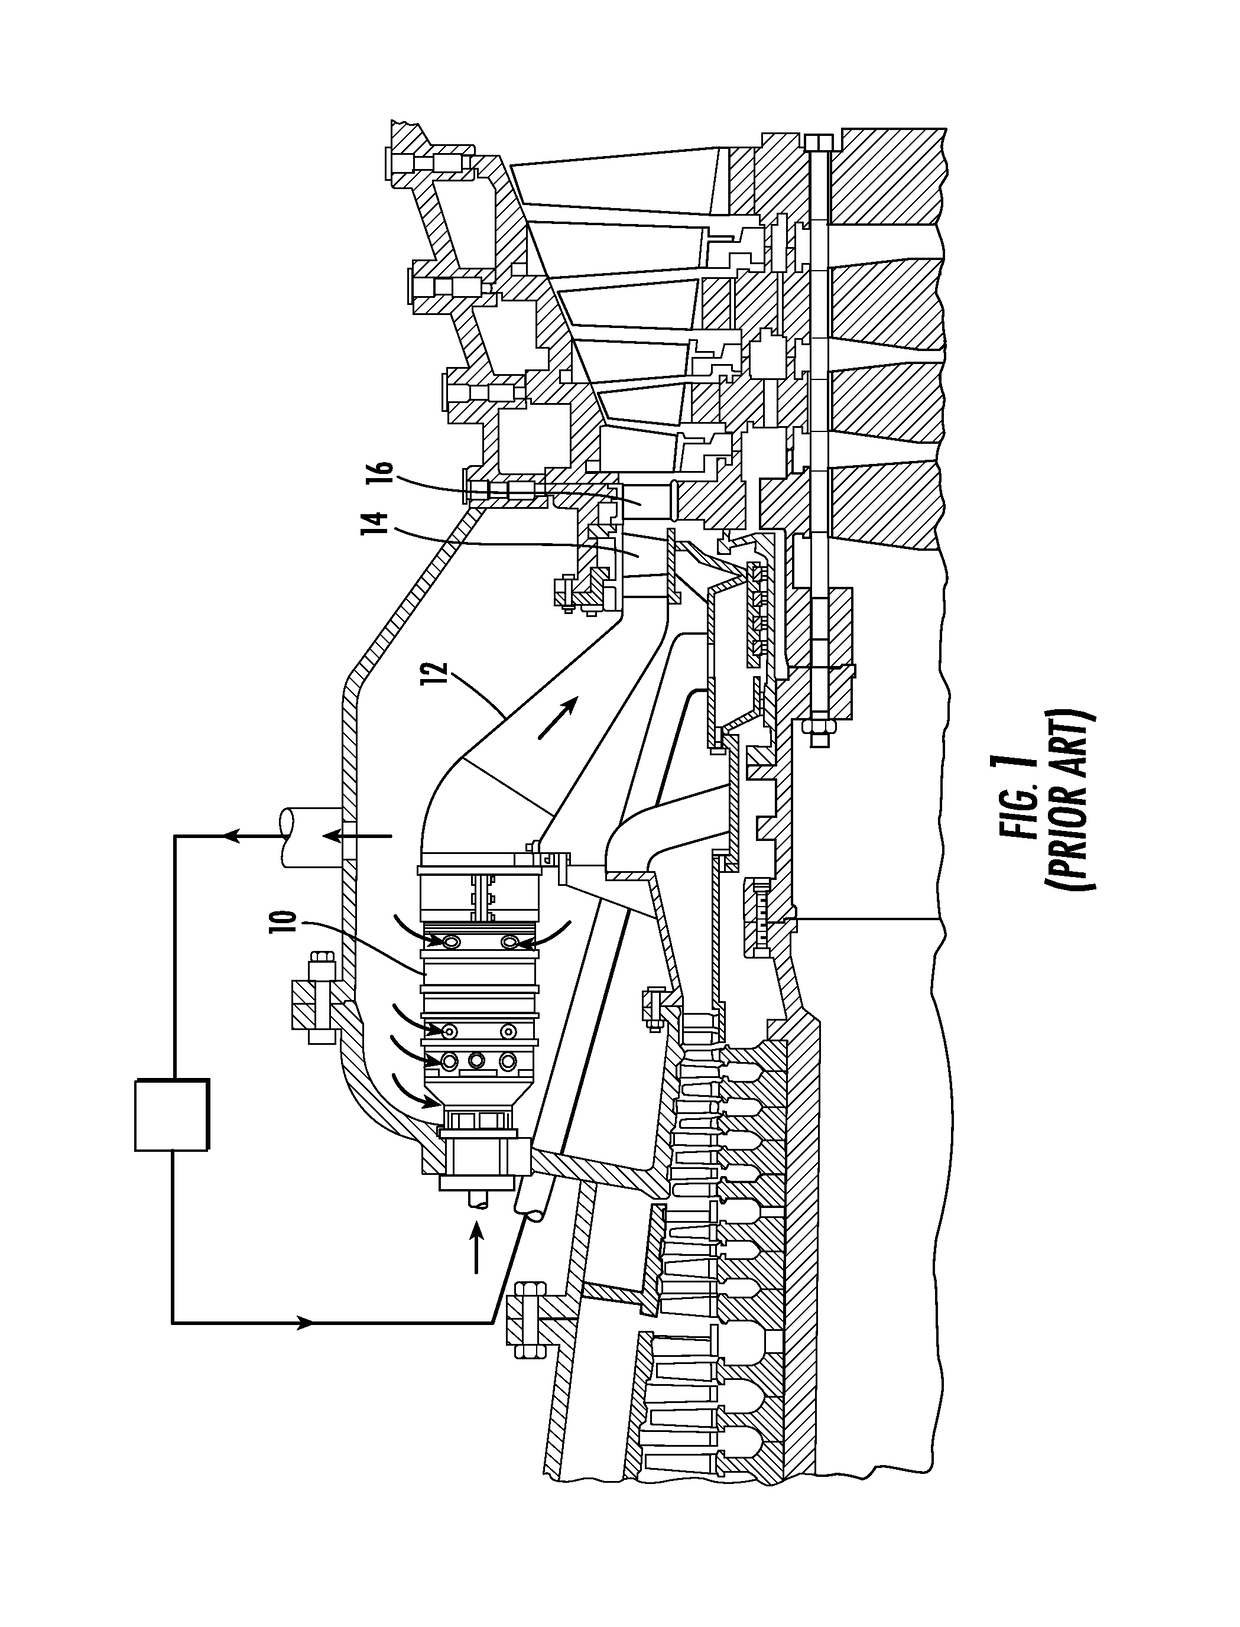 Converging flow joint insert system at an intersection between adjacent transitions extending between a combustor and a turbine assembly in a gas turbine engine